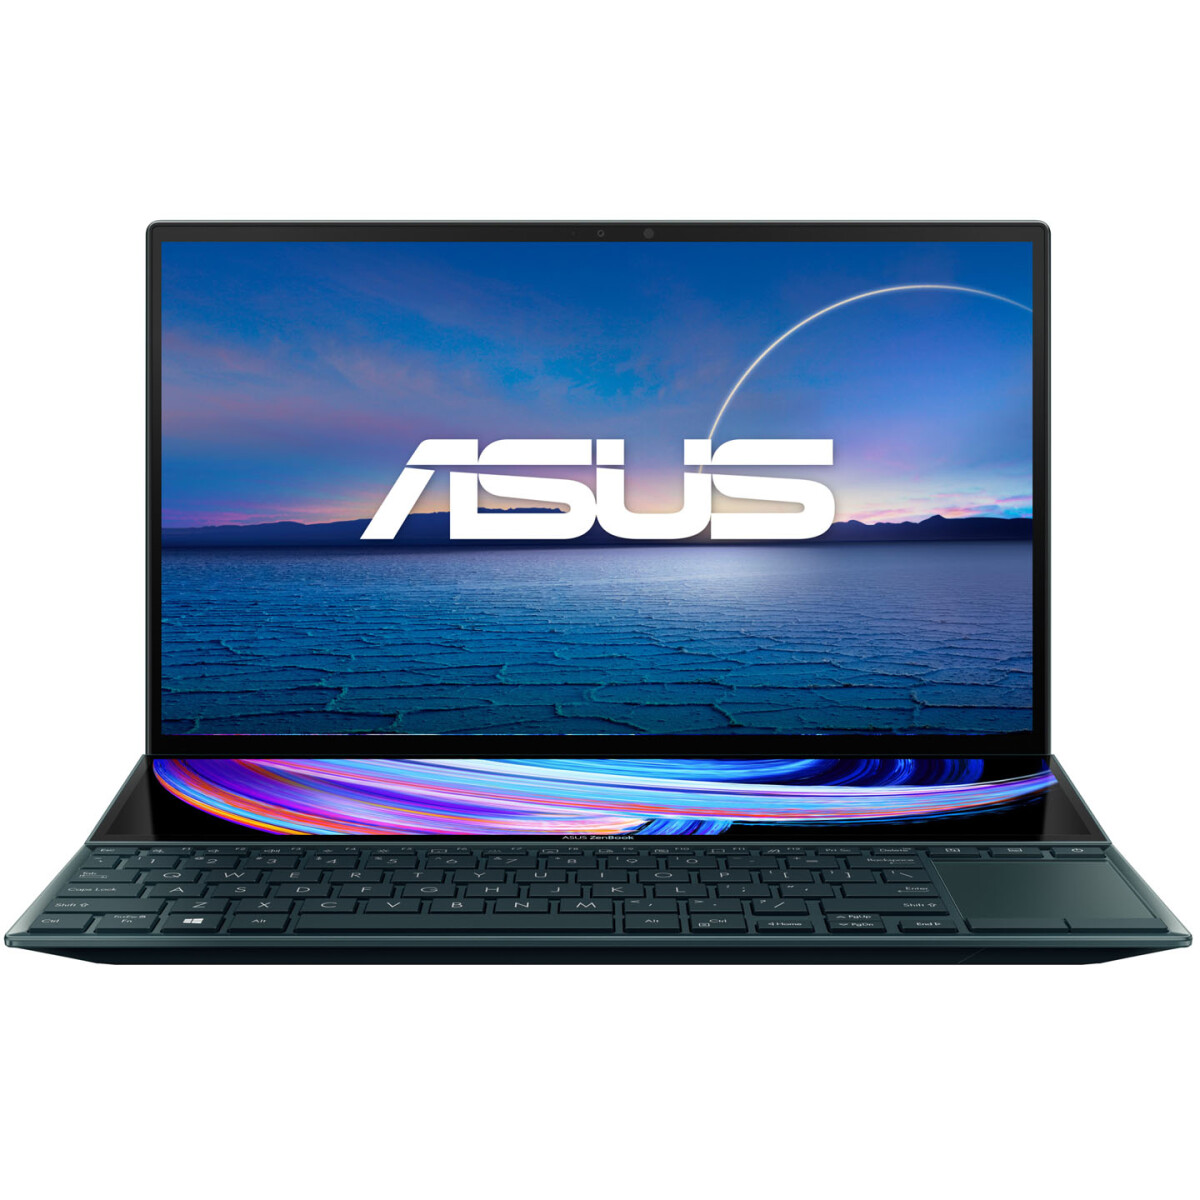 Notebook Asus Zenbook Duo Core I7 4.7GHZ, 16GB, 1TB Ssd, 14''+12.7" Fhd Touch, MX450 2GB - 001 